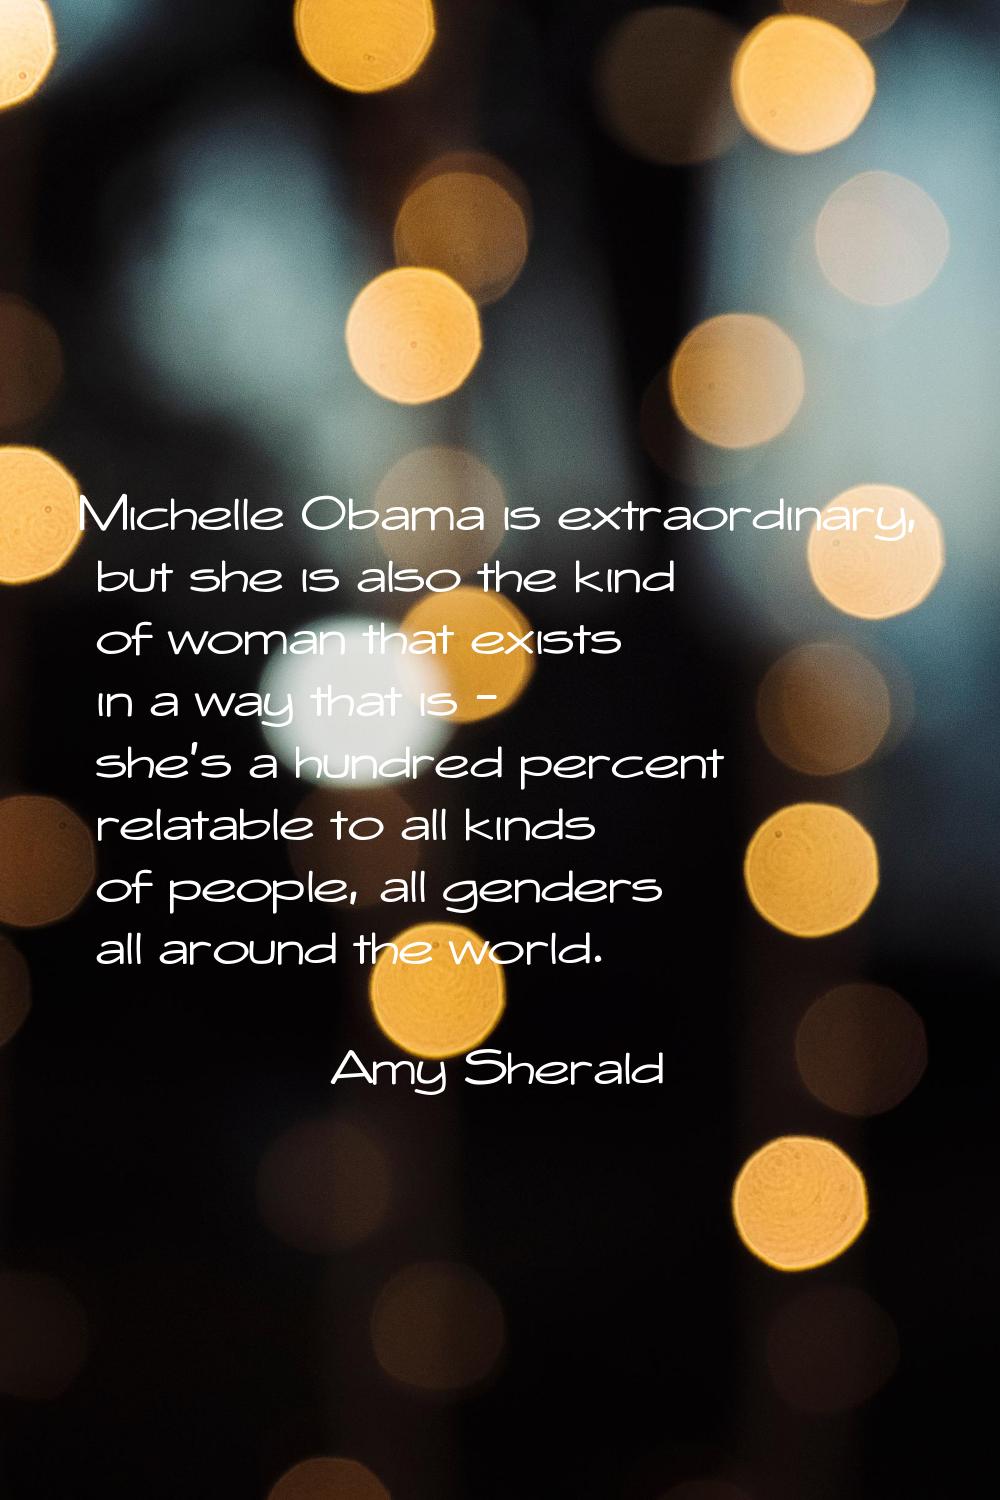 Michelle Obama is extraordinary, but she is also the kind of woman that exists in a way that is - s